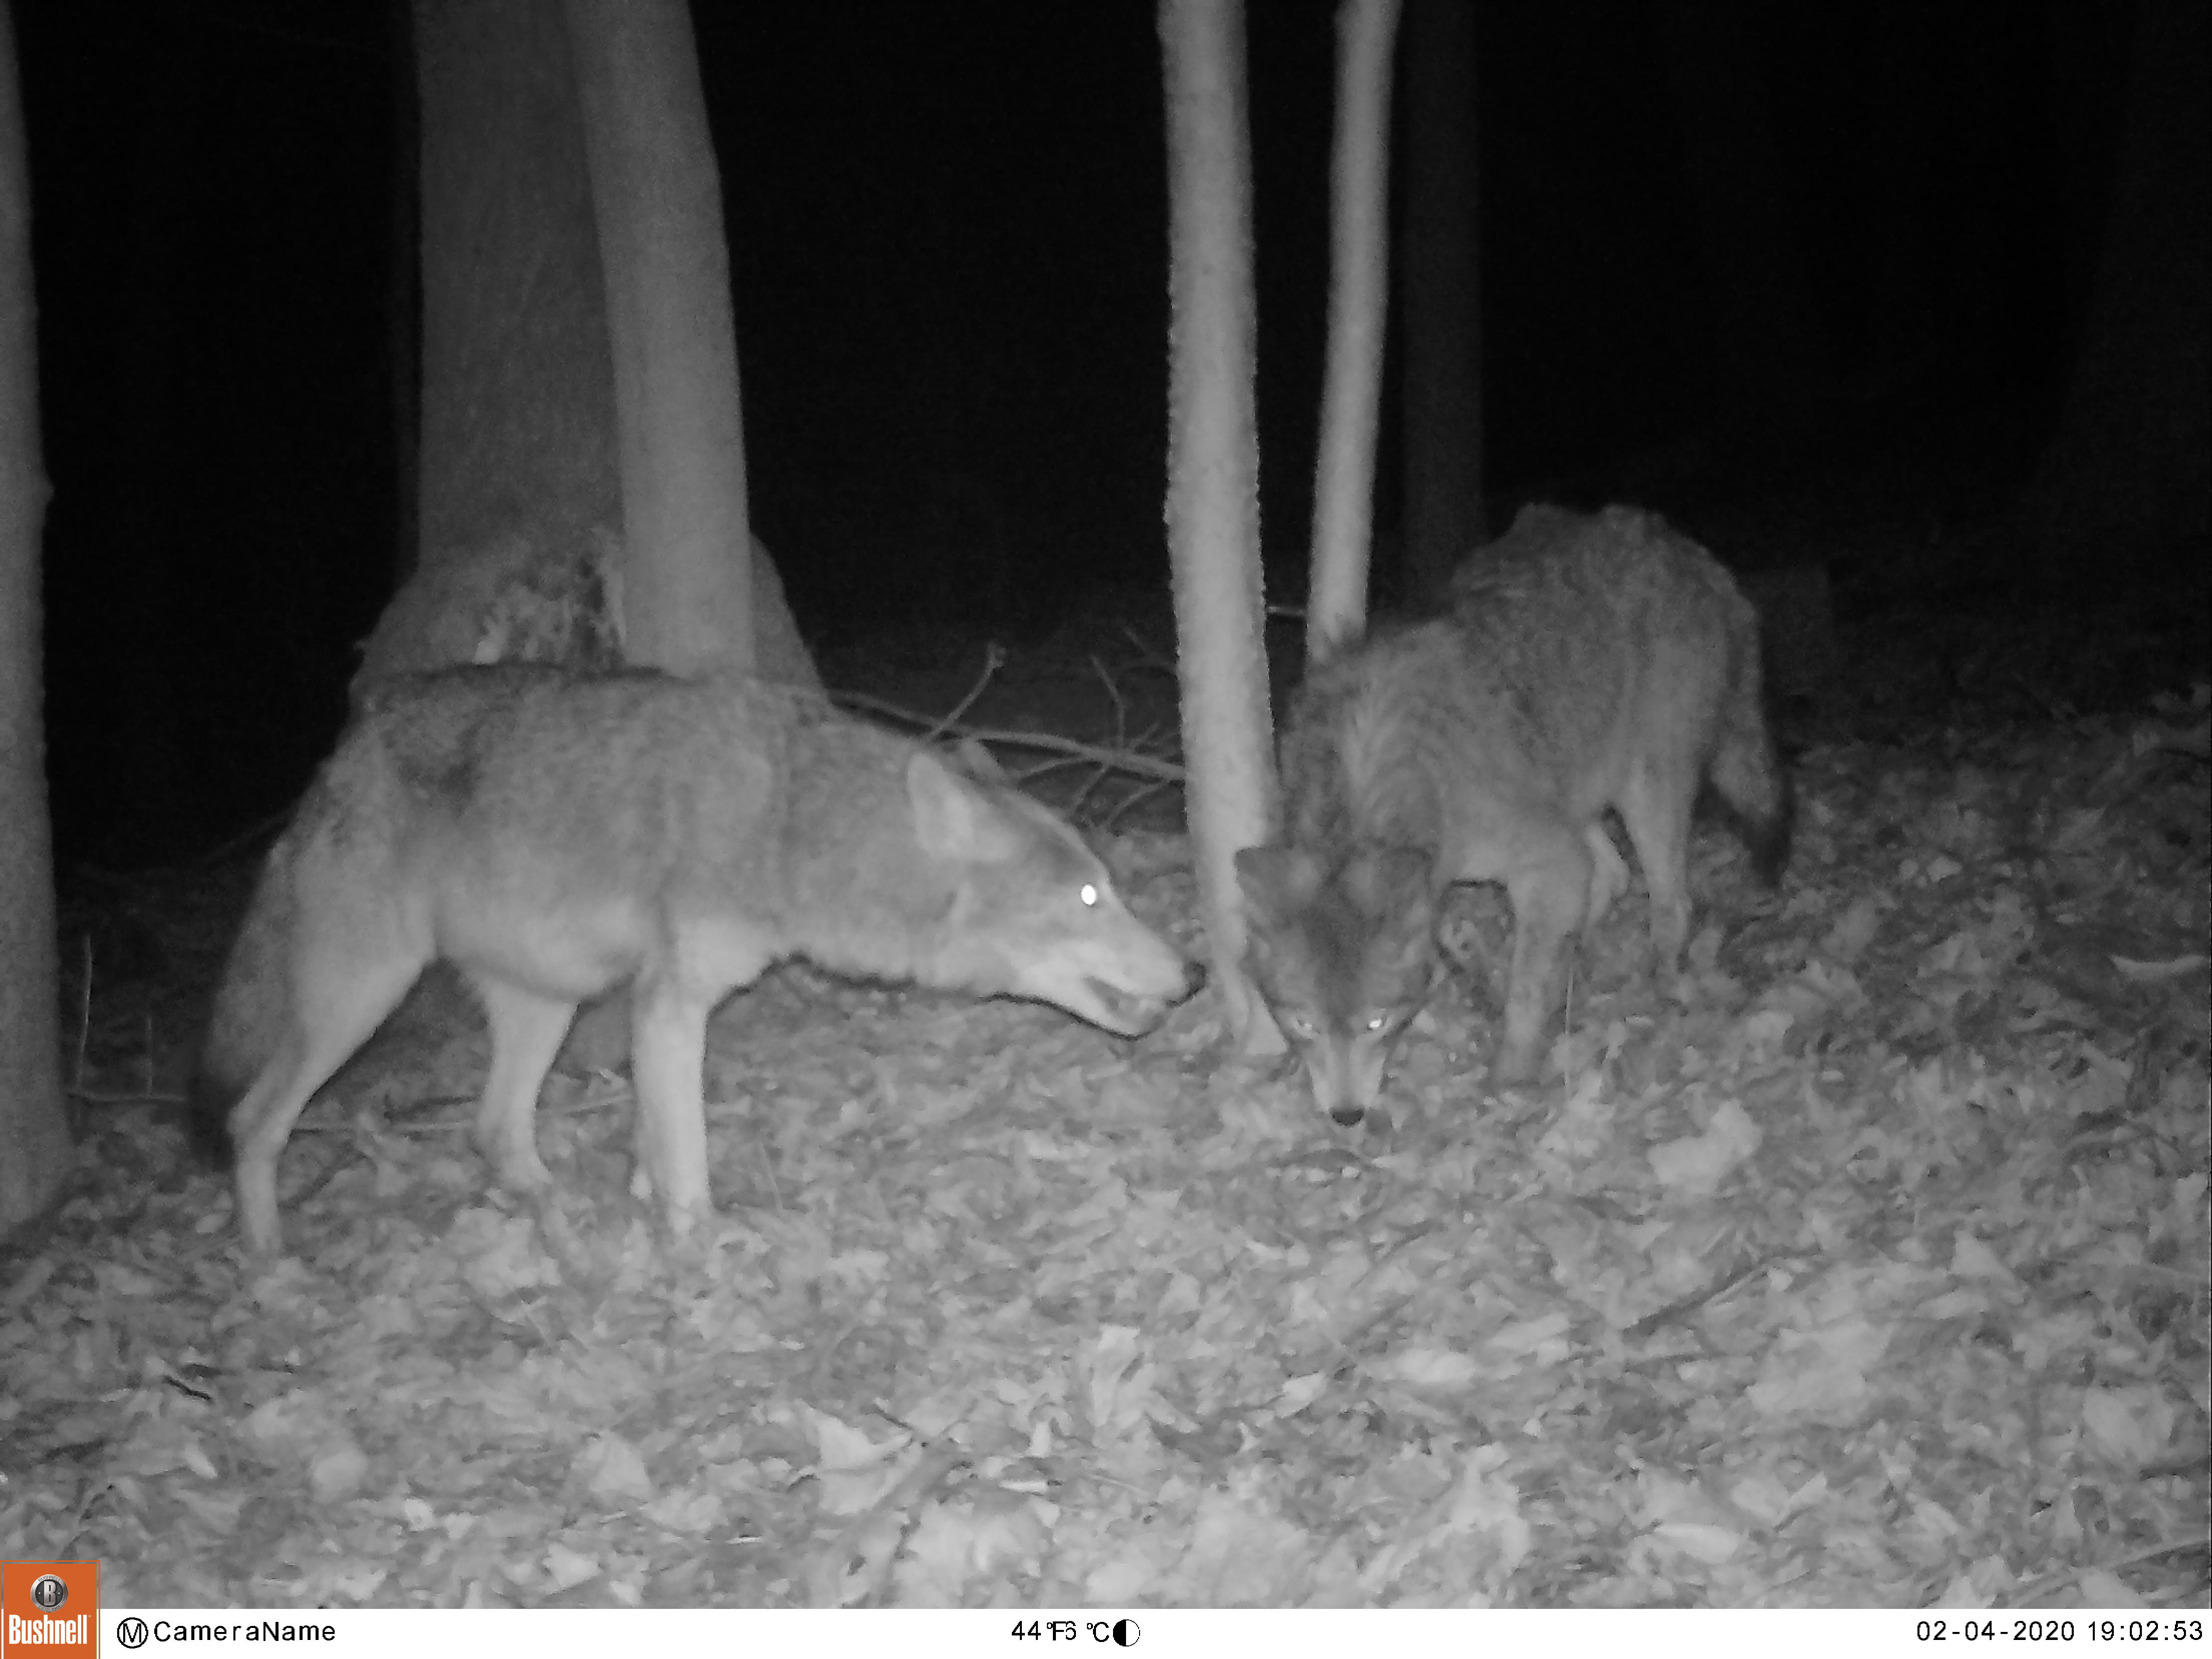 SCENES OF ROCKLAND – Coyotes in Tomkins Cove